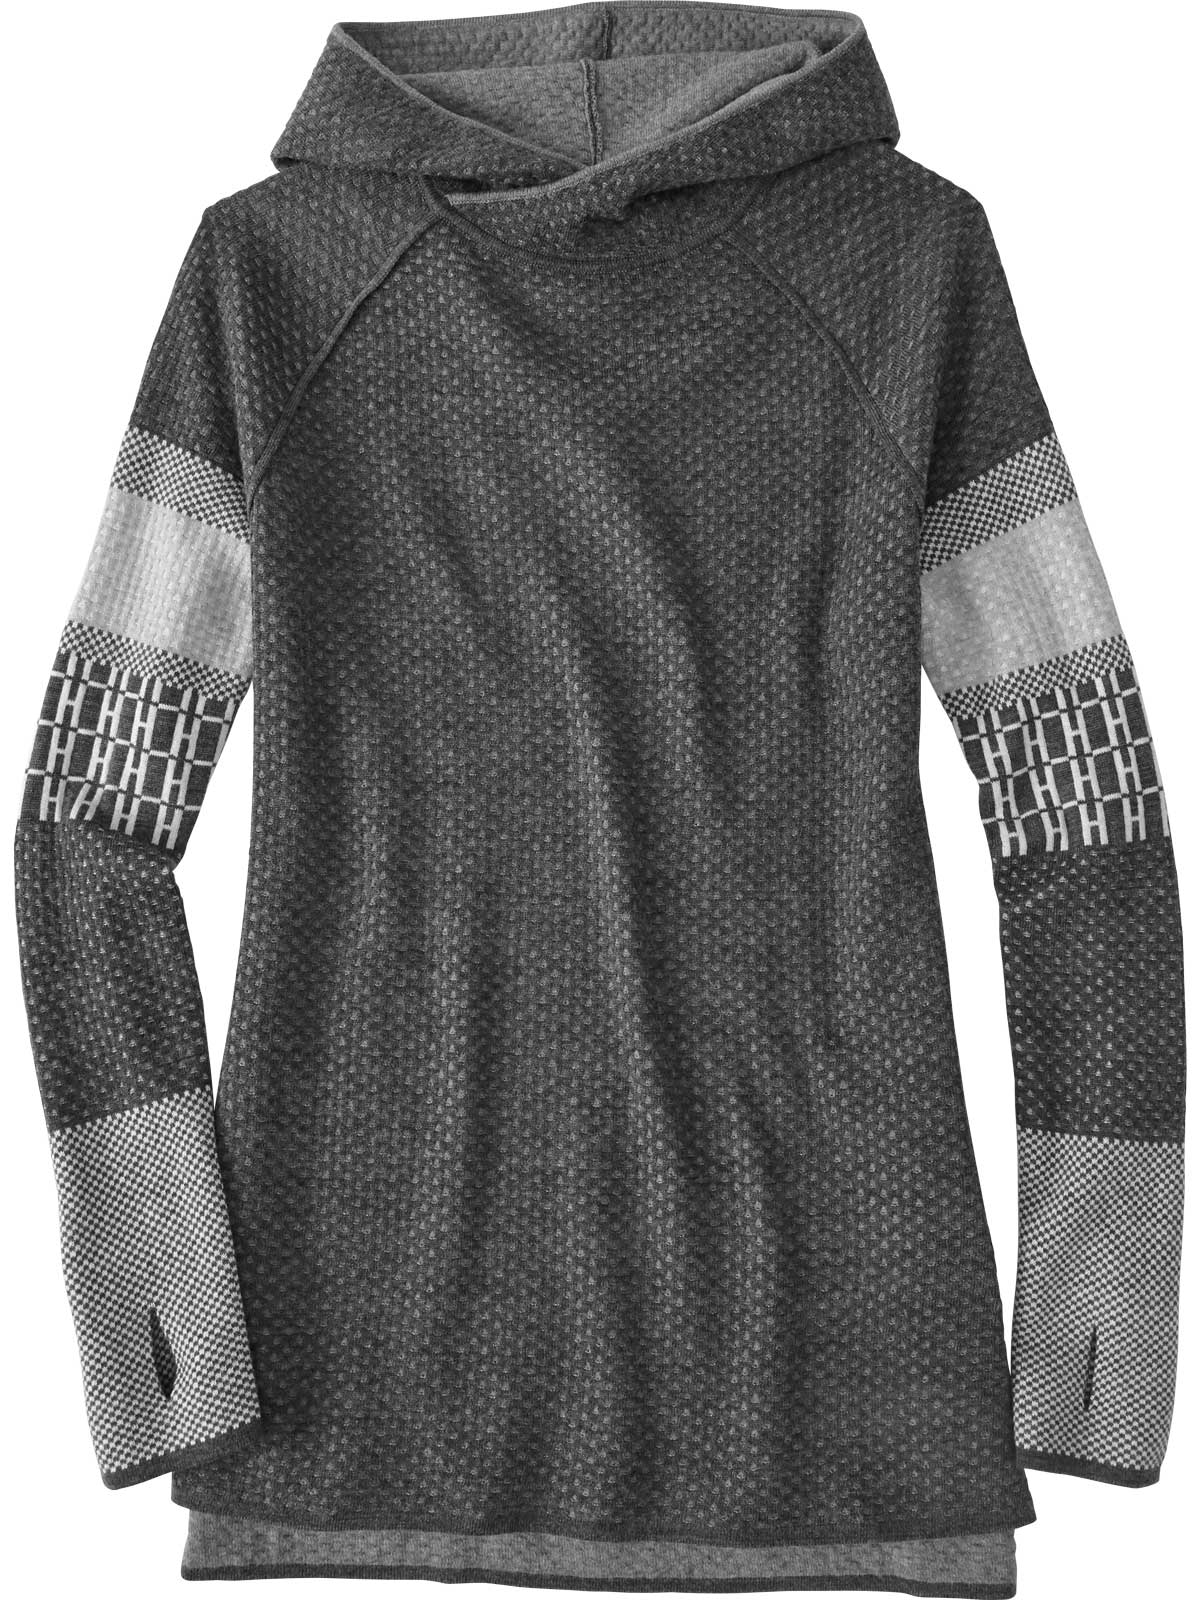 Tunic Sweater Hoodie for Women: Mover Maker | Title Nine